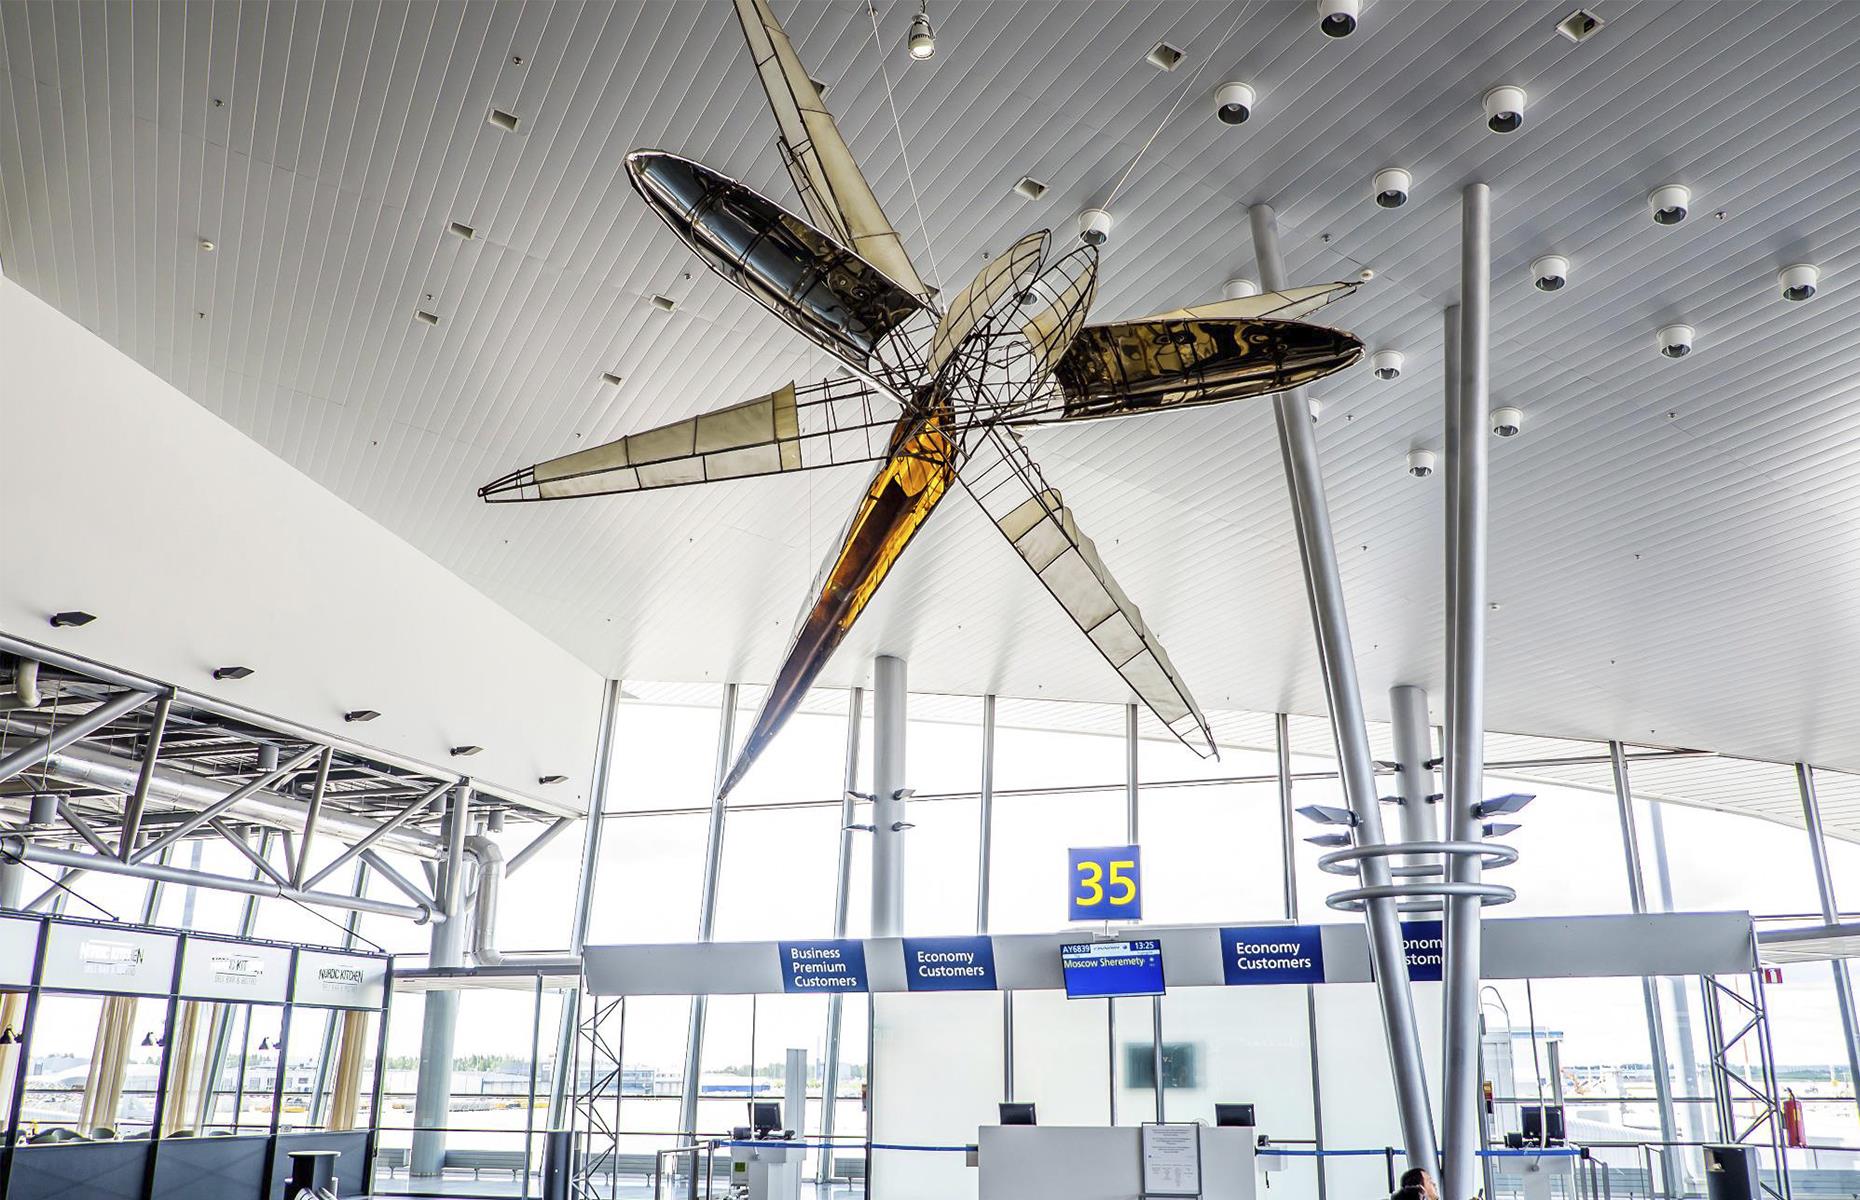 Numerous artworks and sculptures are dotted throughout the airport, meaning there’s always something interesting to look at. The dragonfly sculpture 'Concorde', by the talented artist Stefan Lindfors, can be found in the south pier for long-haul flights.